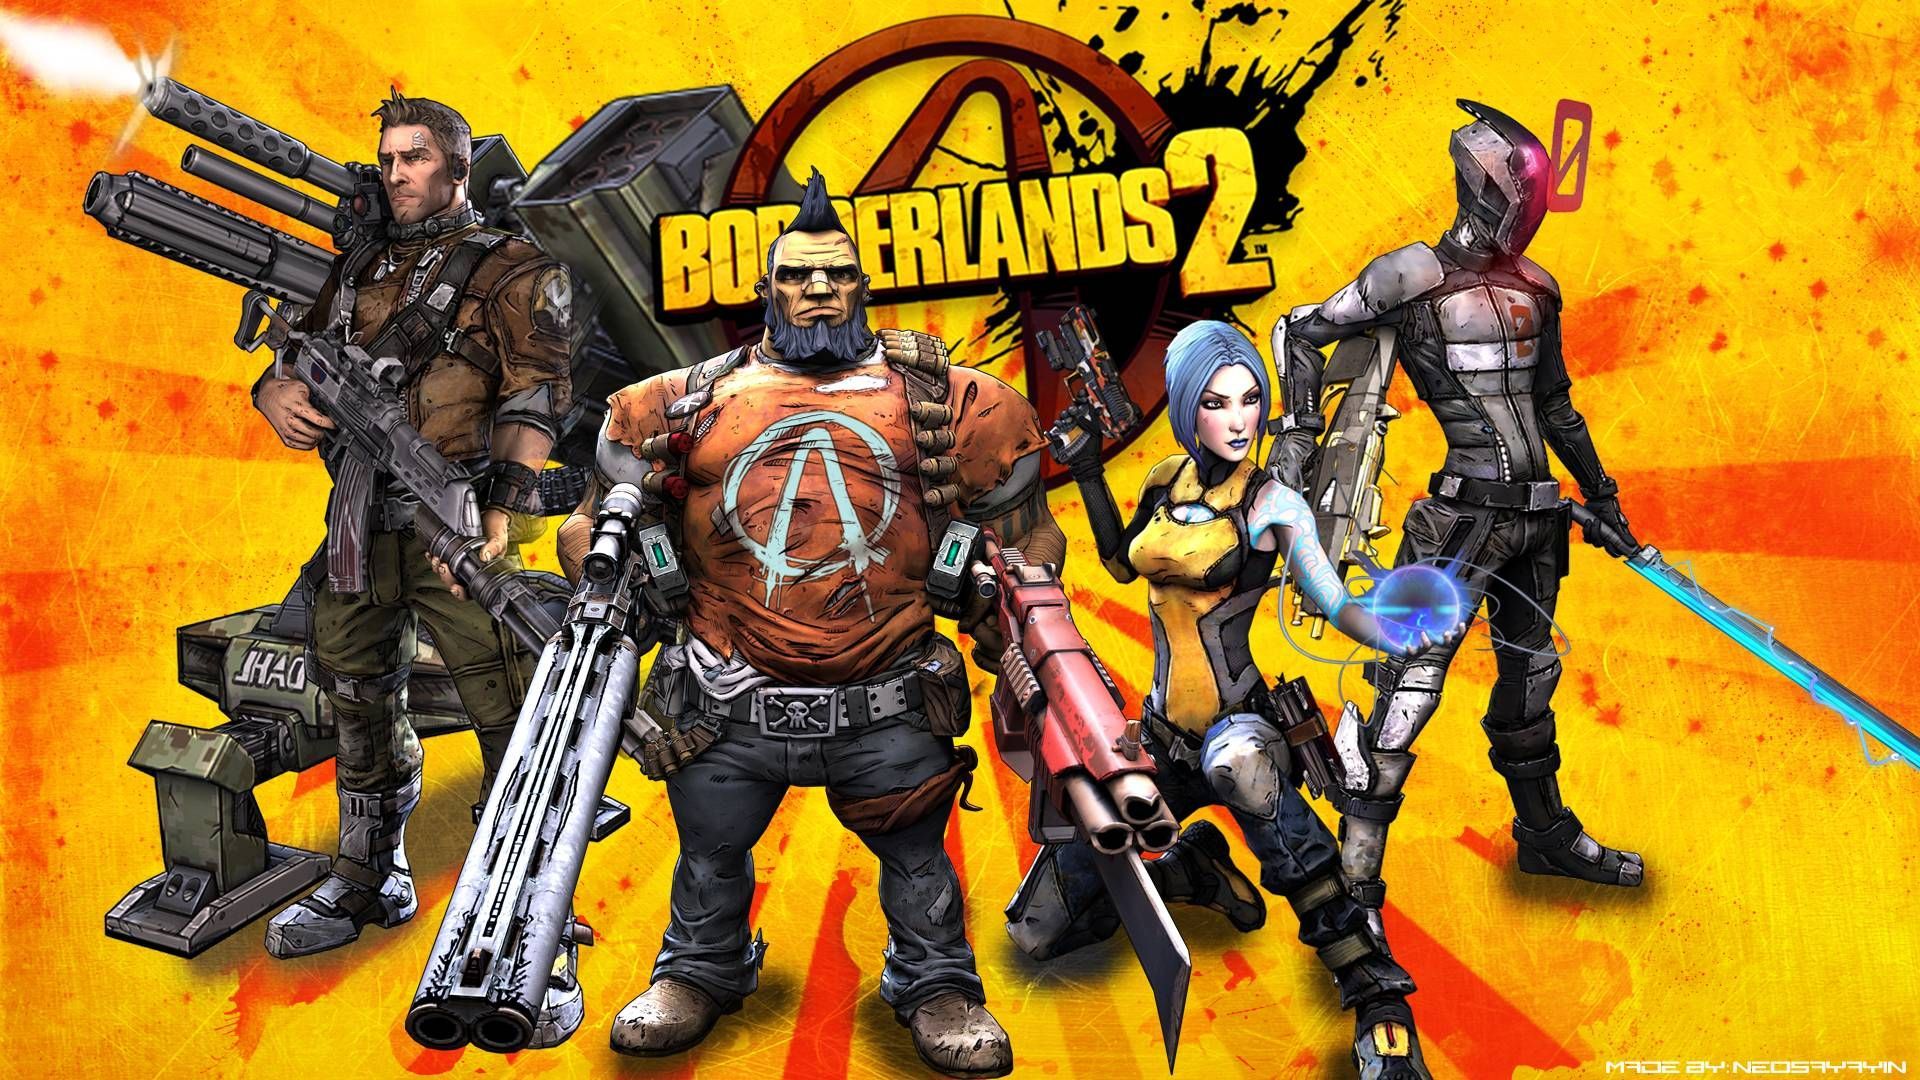 HQ 1920x1080 px Resolution Borderlands 2   Wallpapers and Pictures